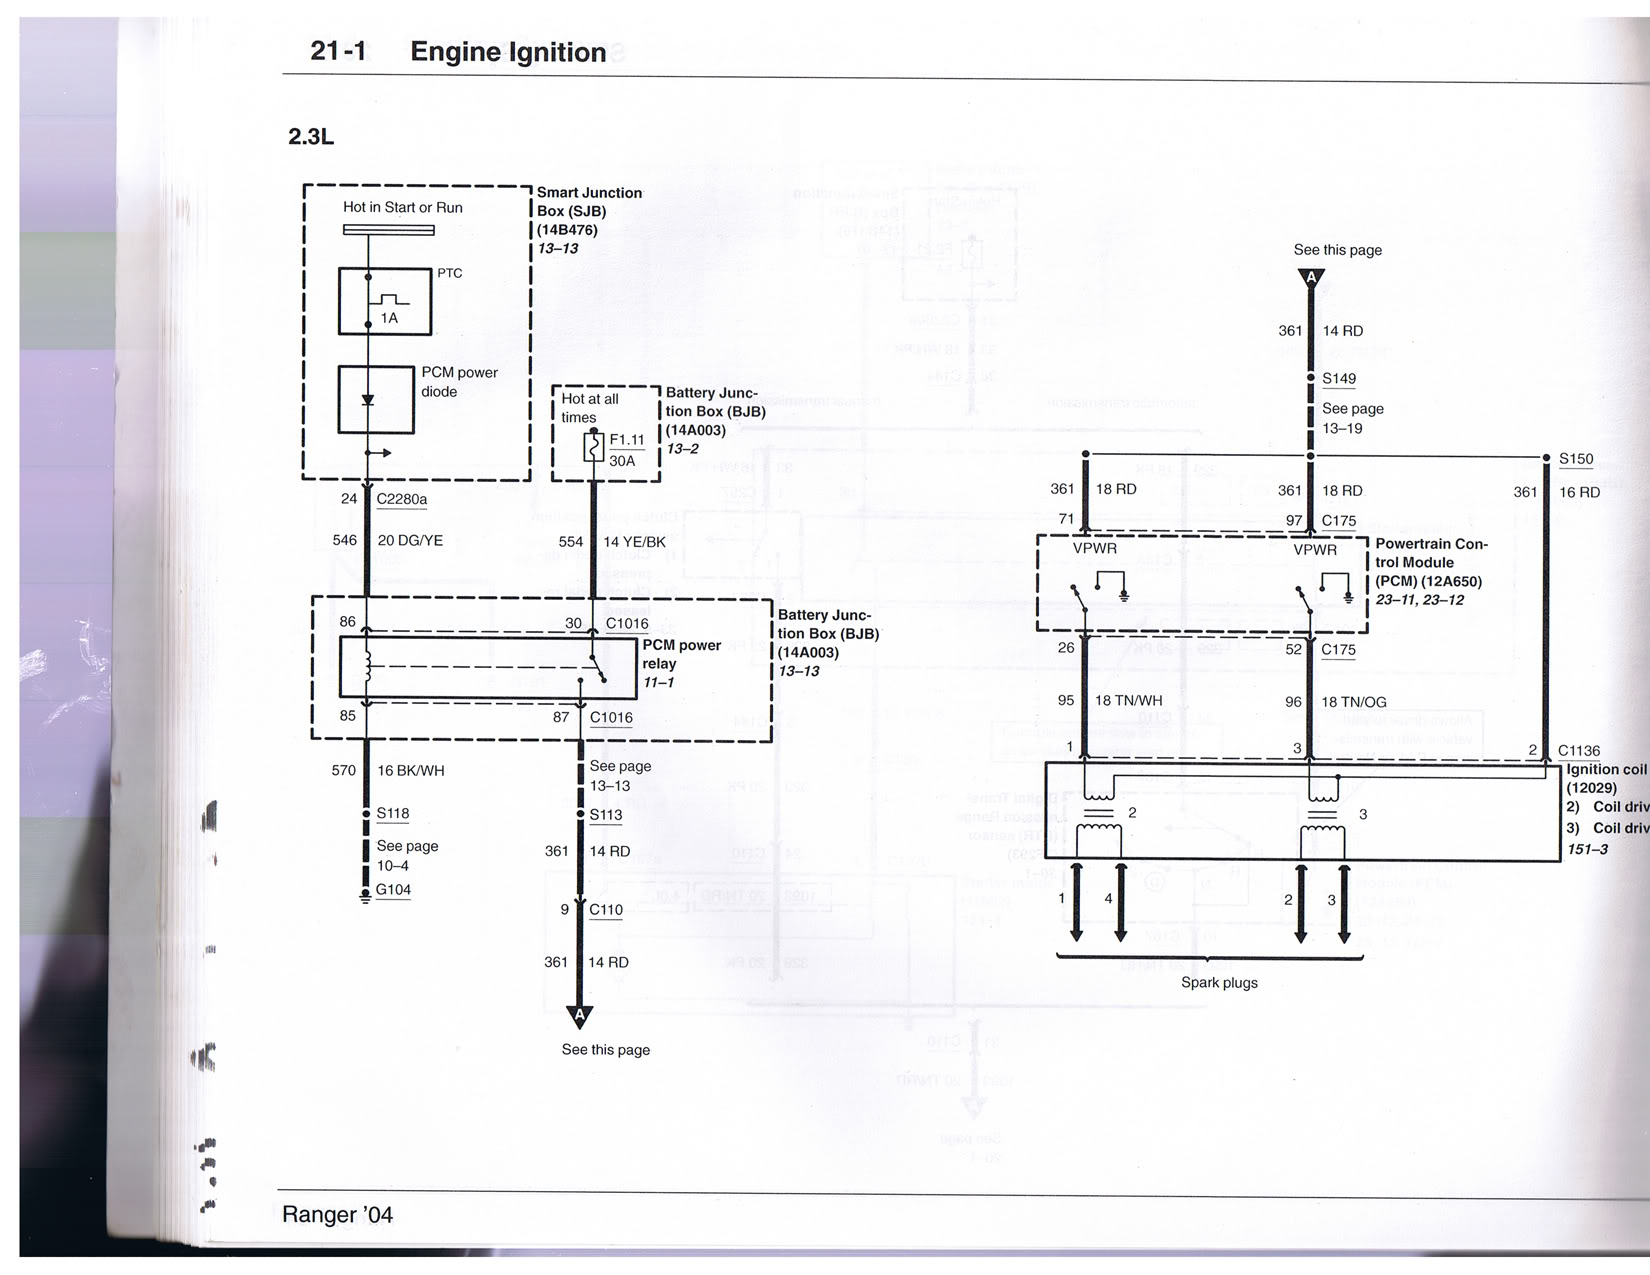 2004 Ford Ranger Wiring Diagram from www.ranger-forums.com